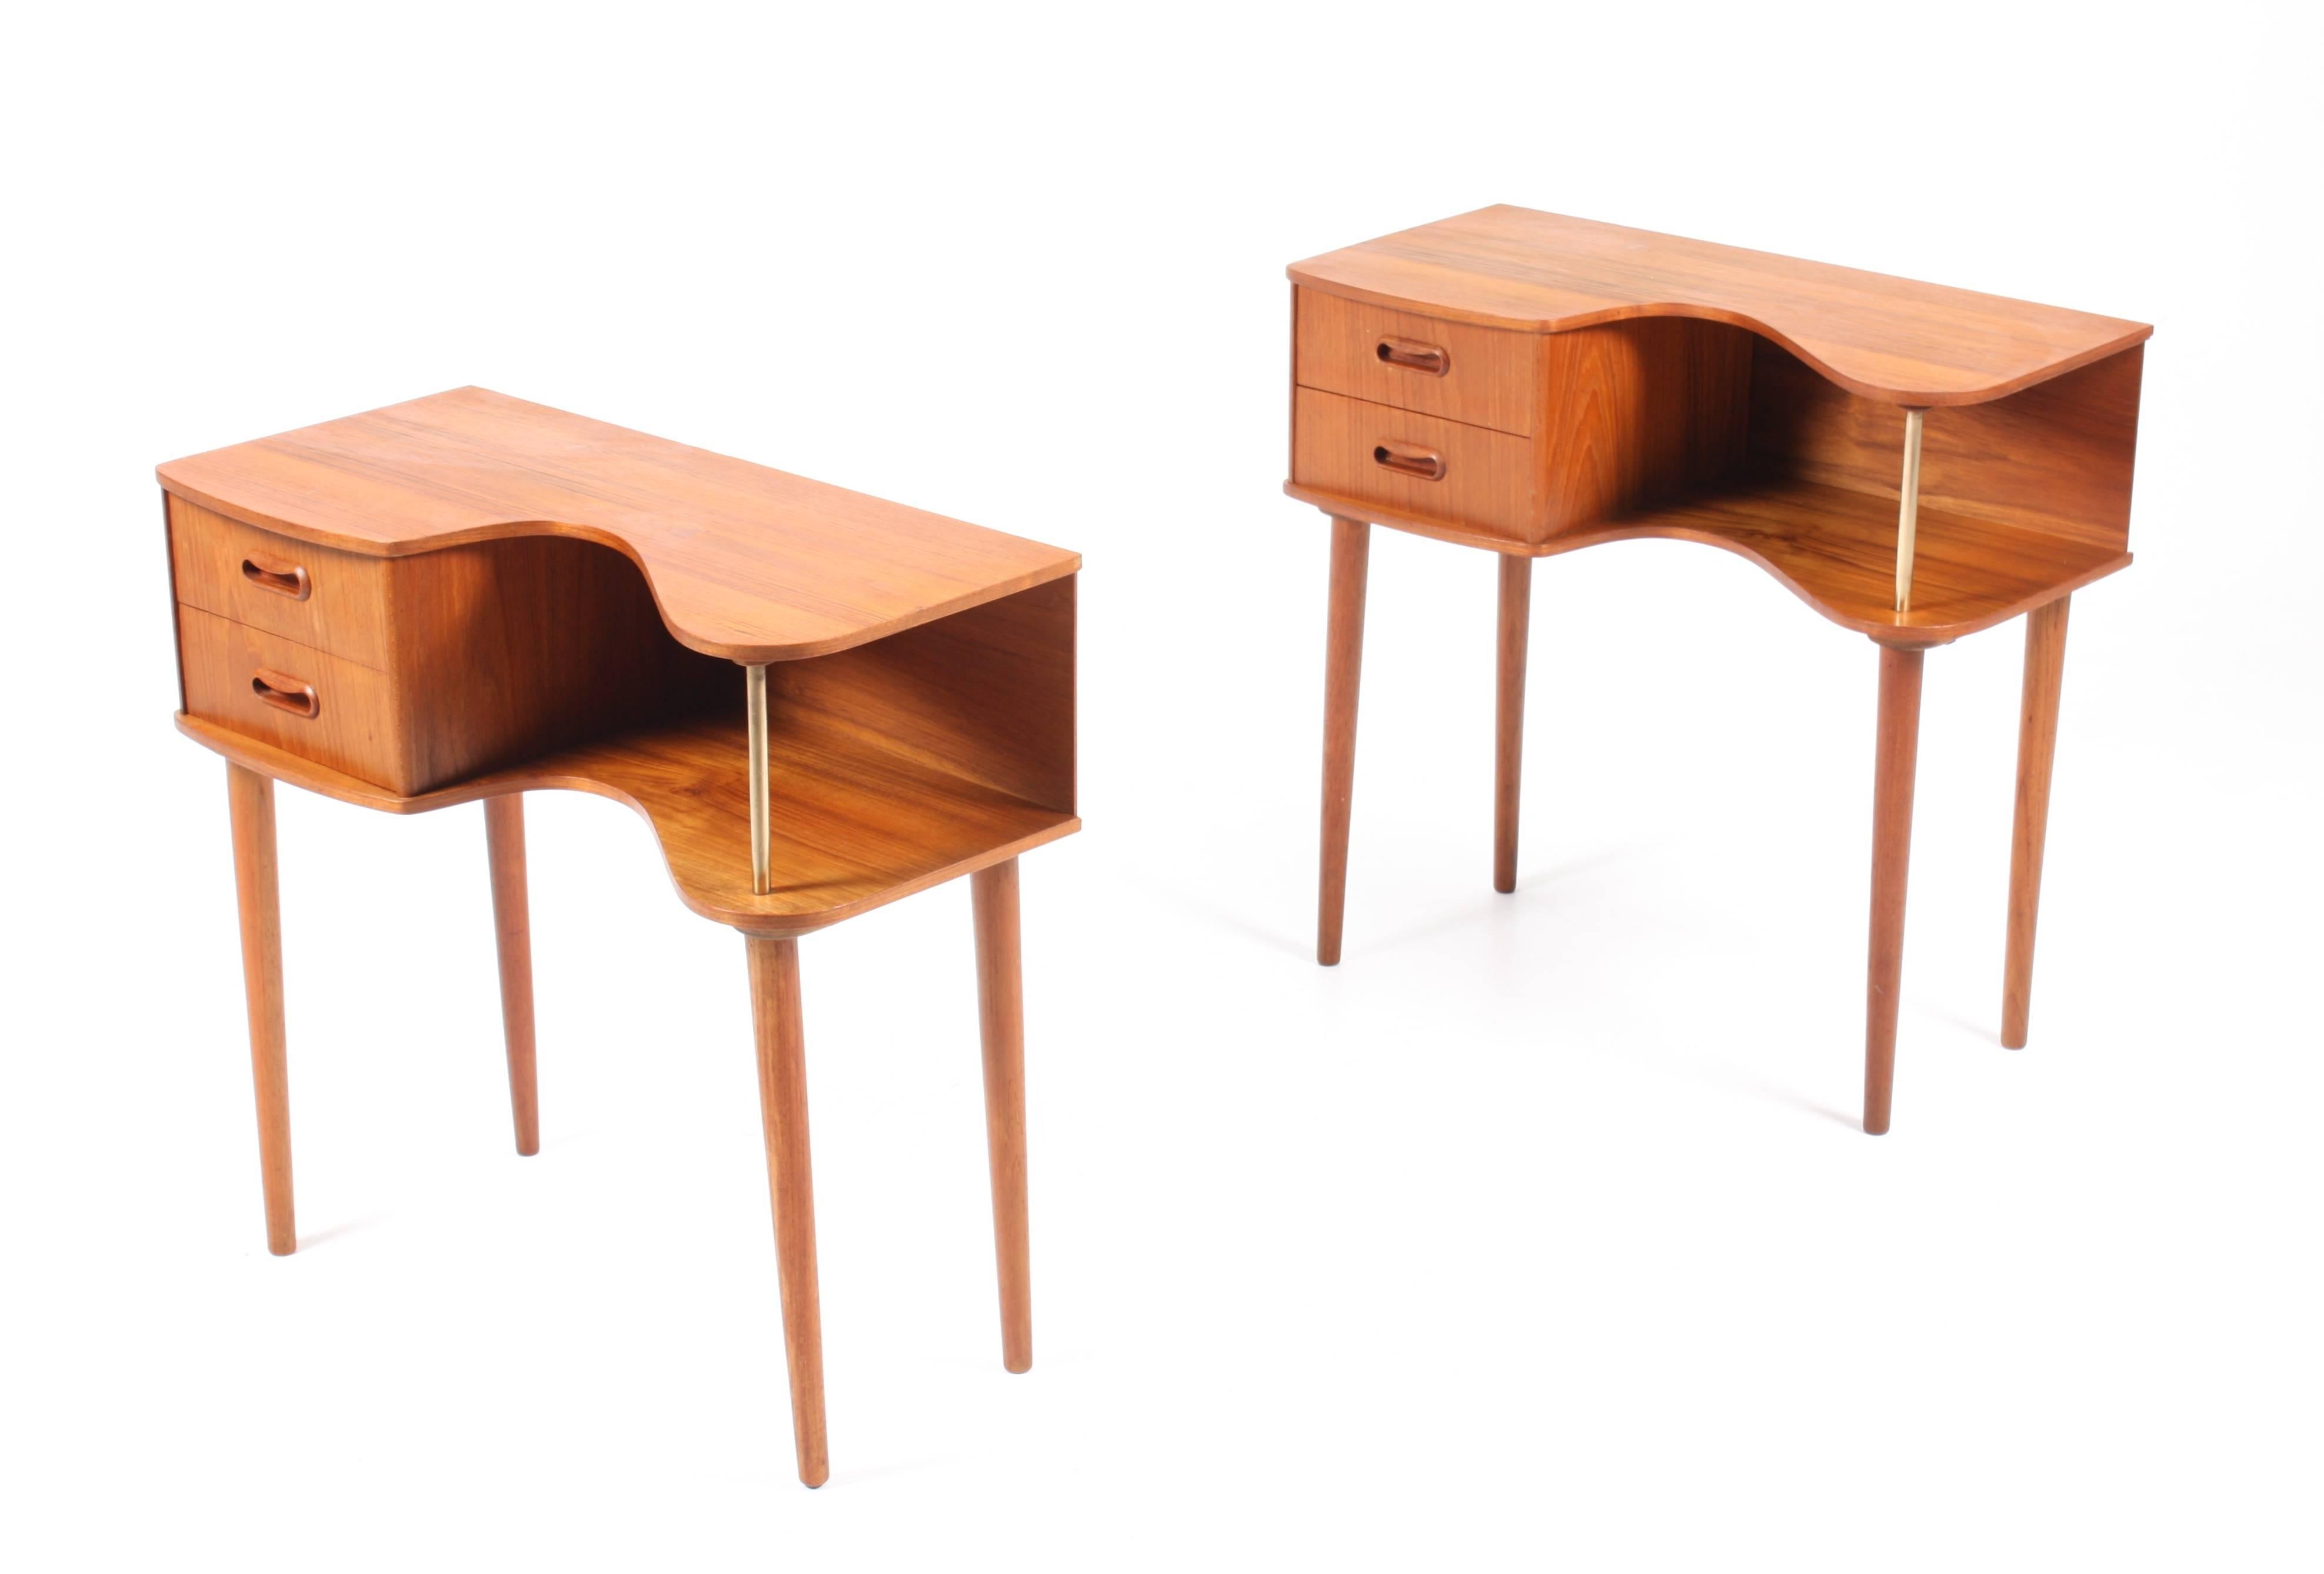 Pair of end tables in teak. Designed by Kai Kristiansen M.A.A. for FM Furniture. Made in Denmark in the 1950s. Great original condition.